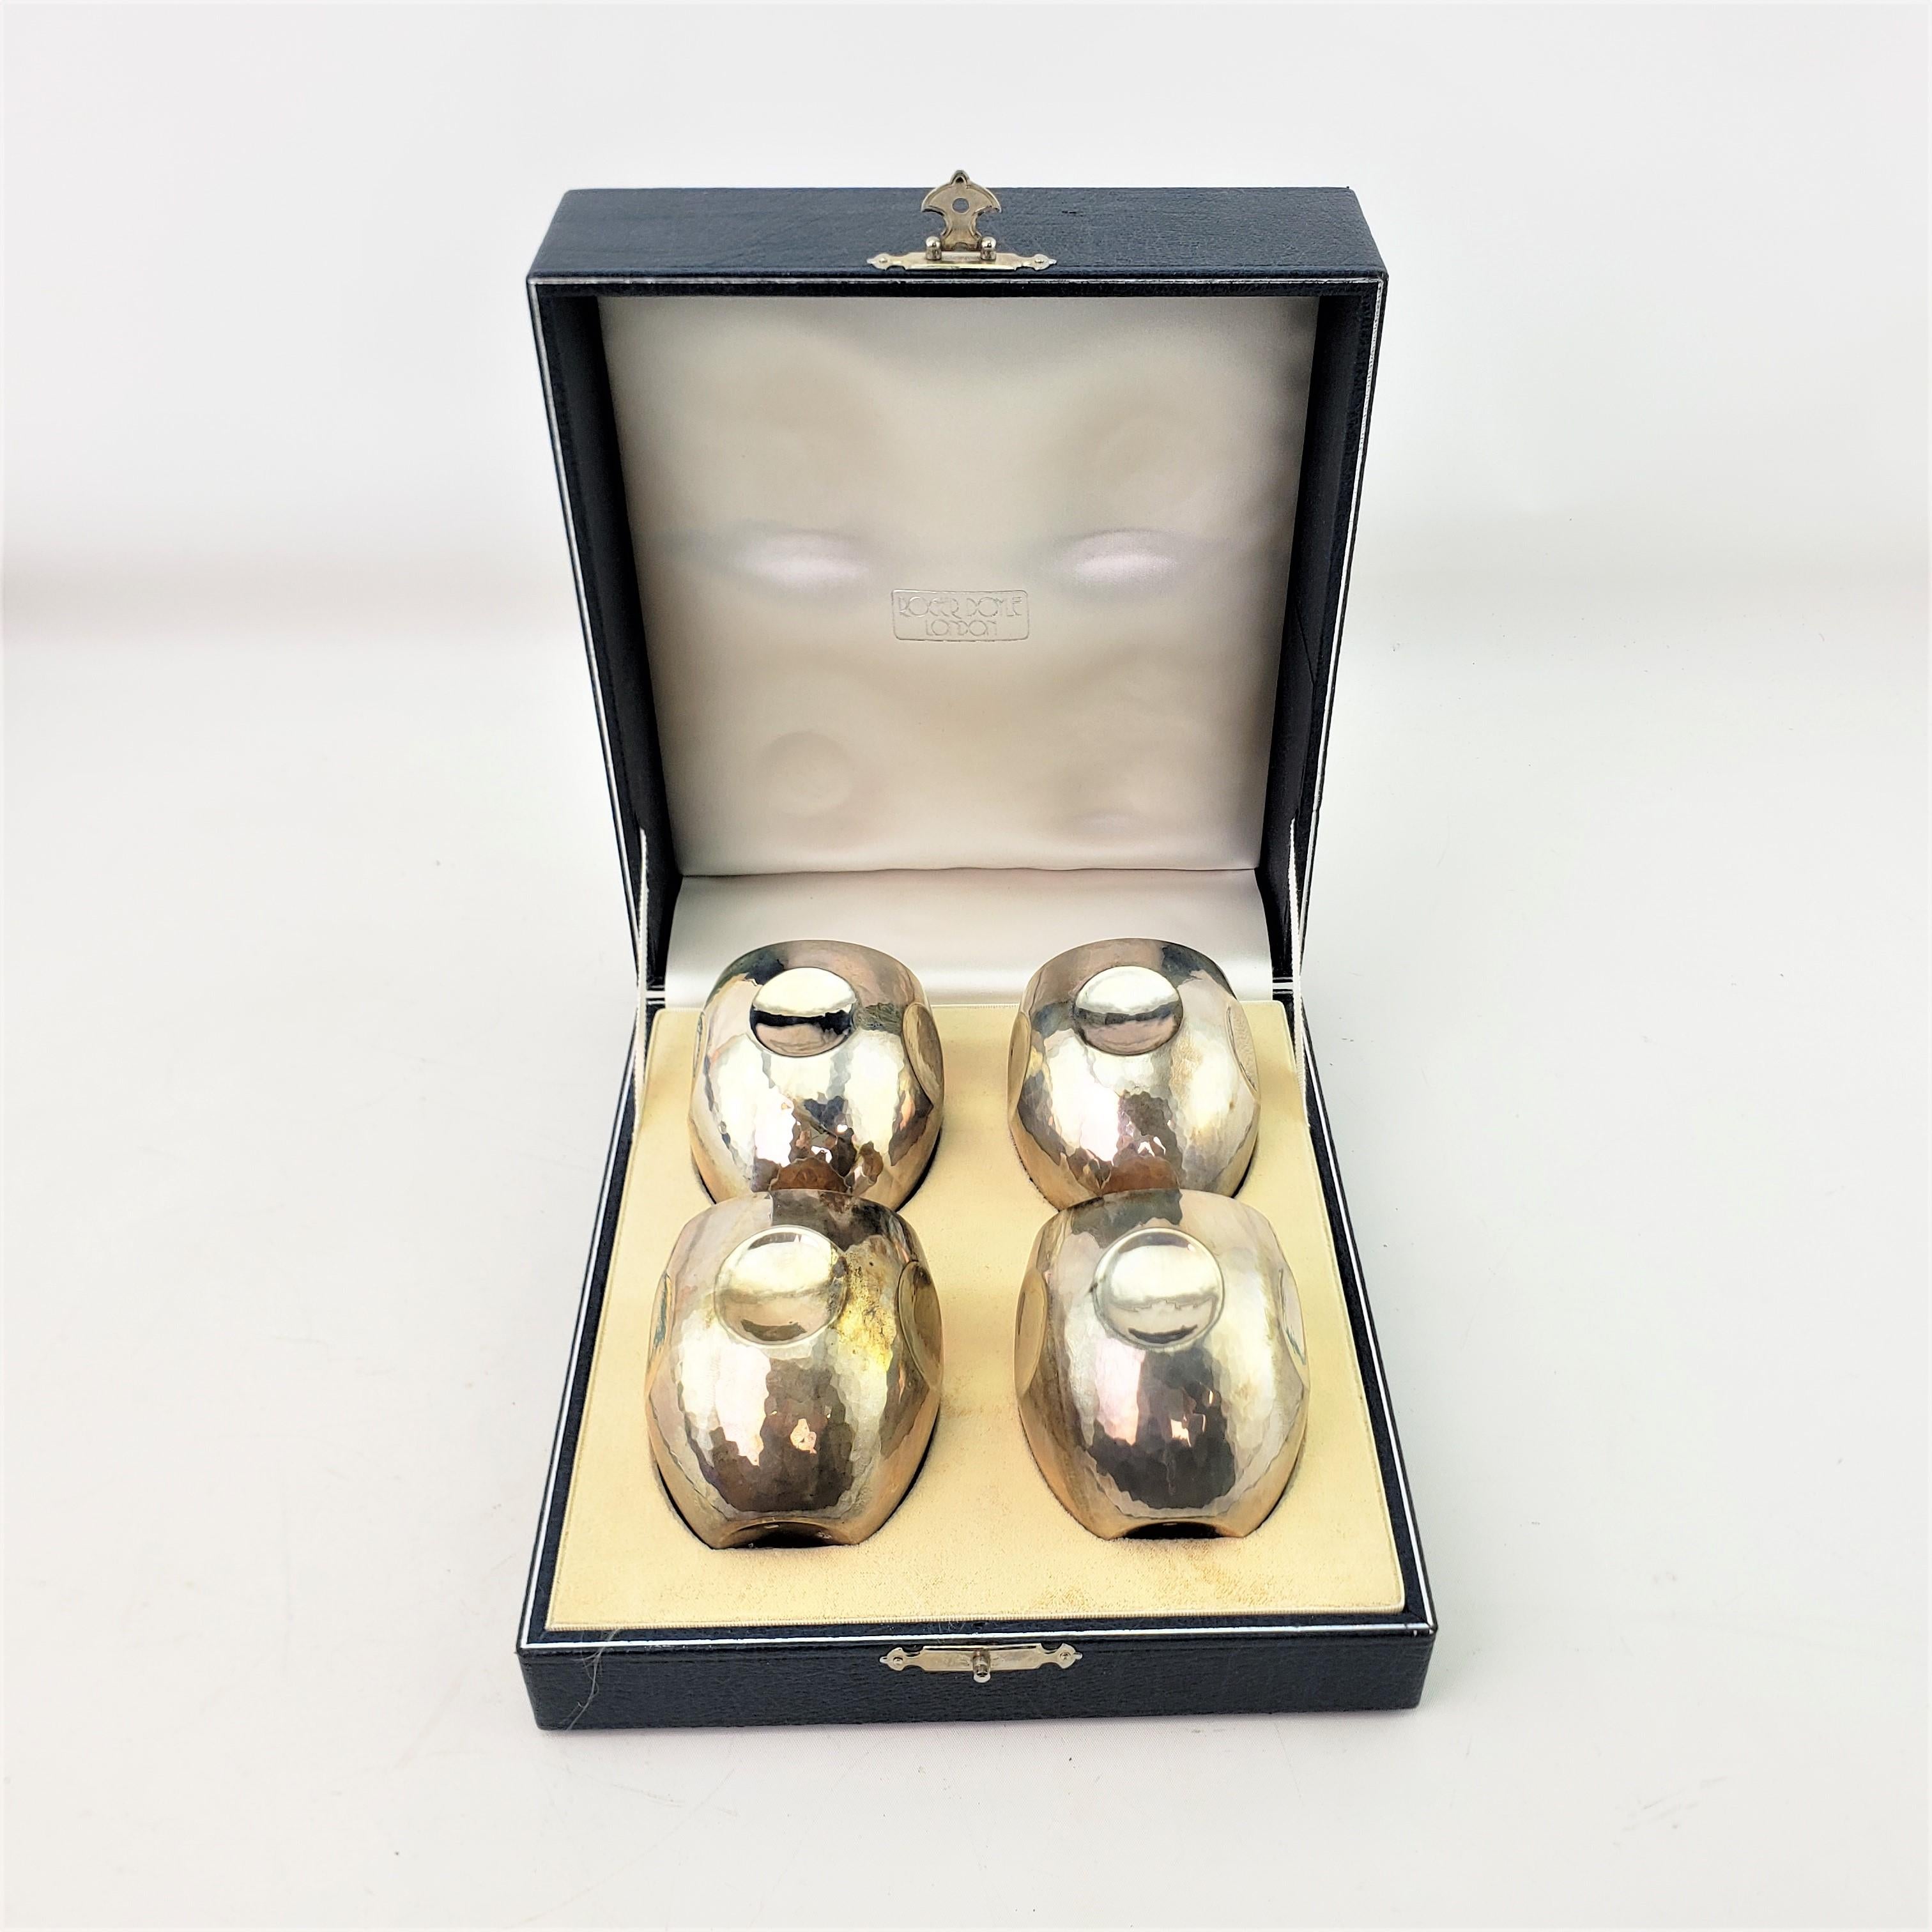 This set of four spirit cups were made by the well known Roger Doyle silversmith of England in 2000 in an early Elizabethan style. The cups are hand-crafted in a tulip shape with large dimples around the sides with a gilt washed interior and are